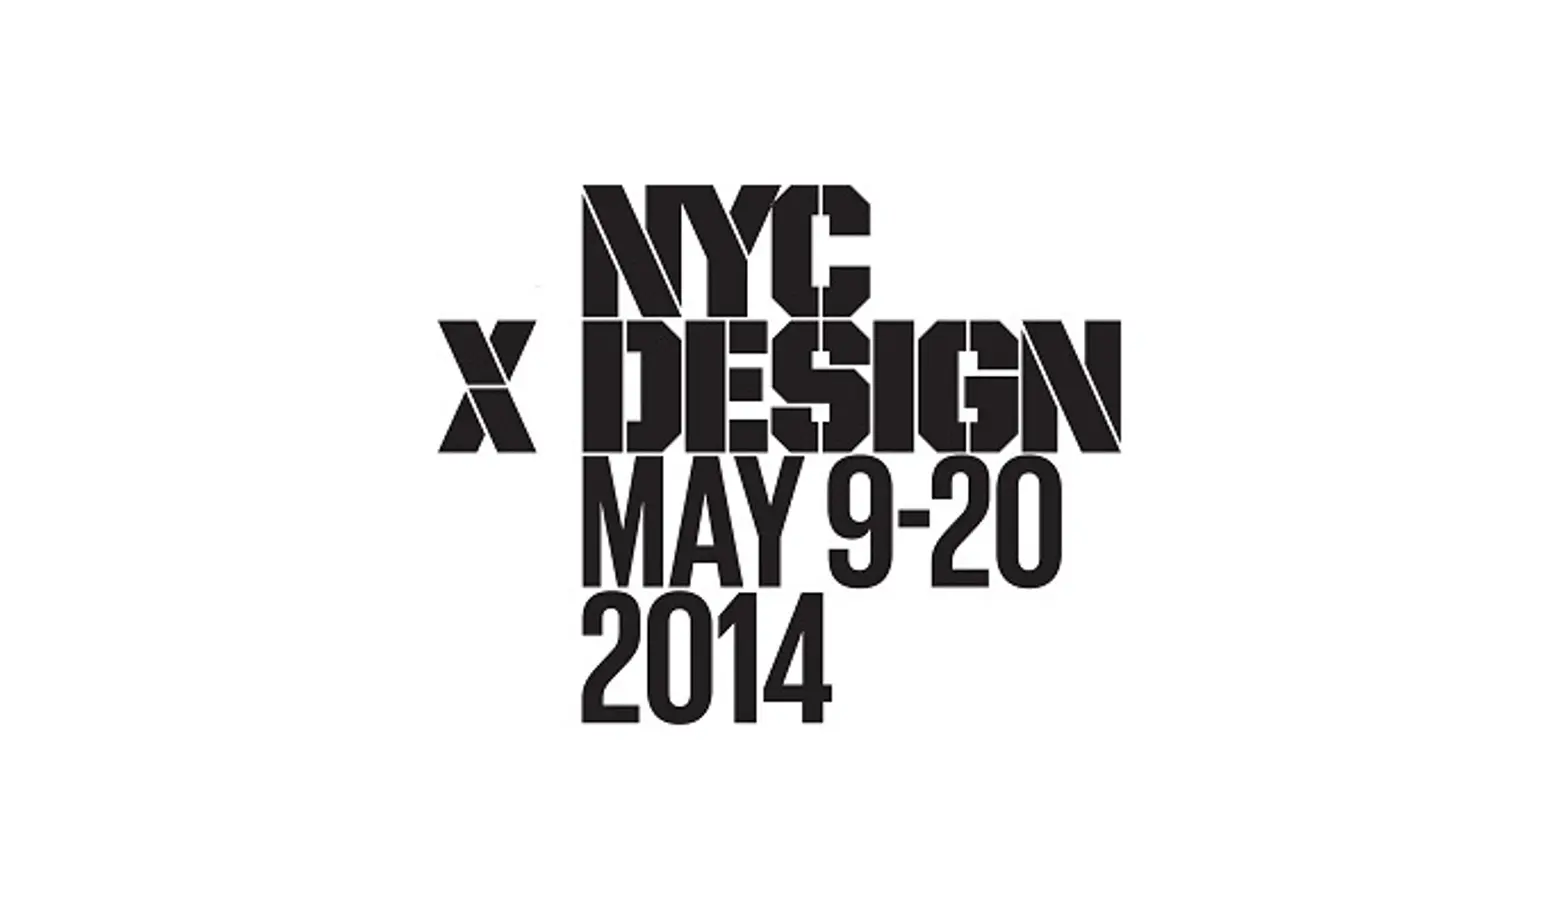 NYCXDESIGN_DATE2014